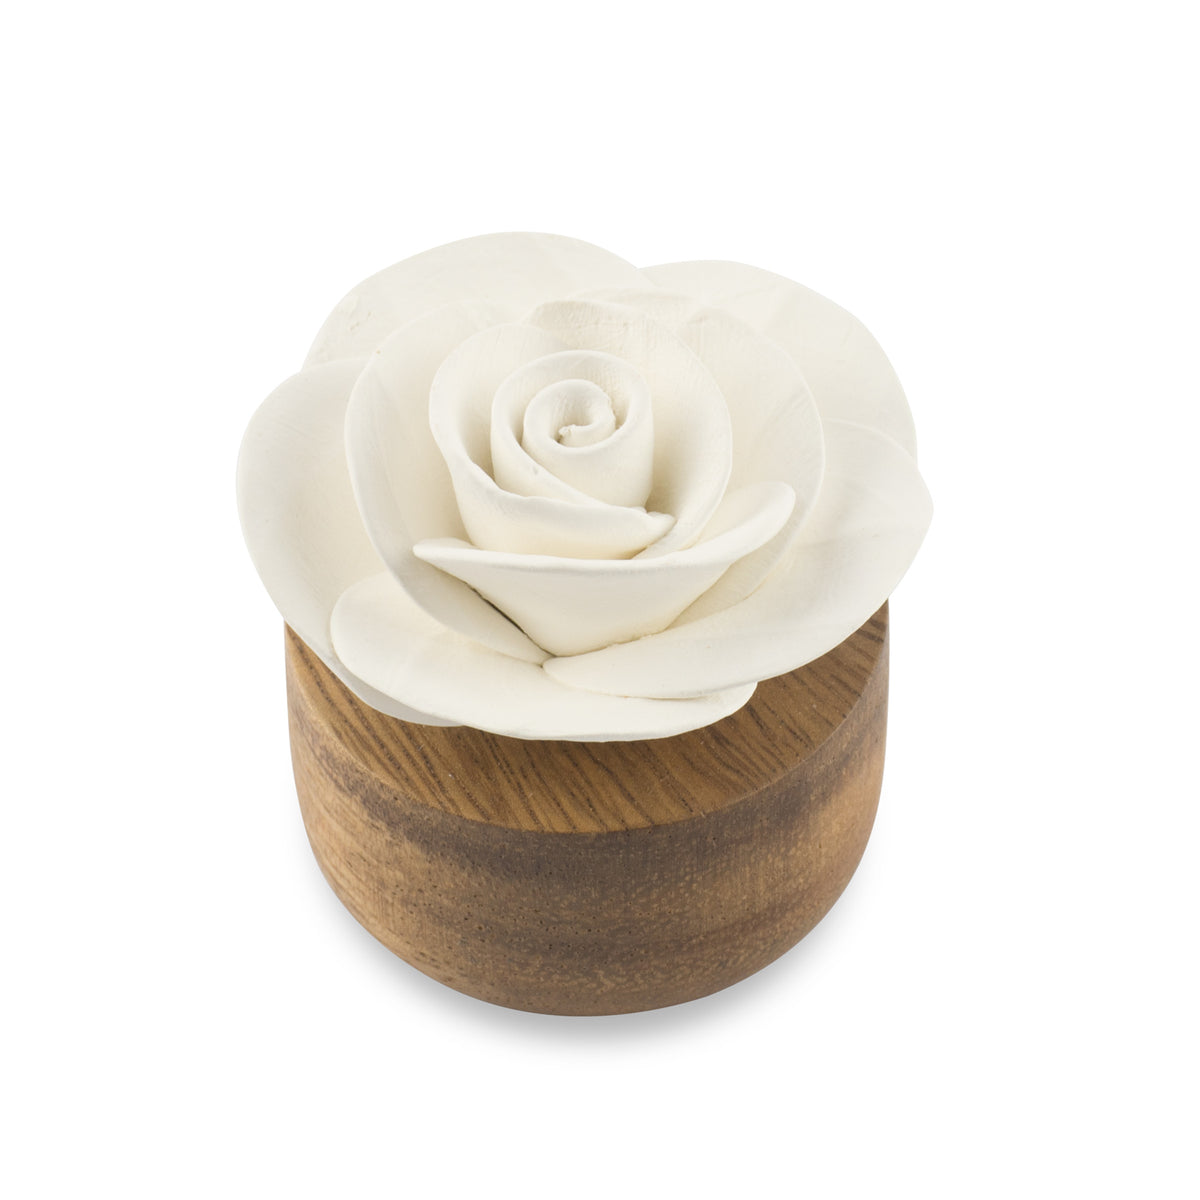 Flower Refreshment Scenting Clay Rose - HYSSES